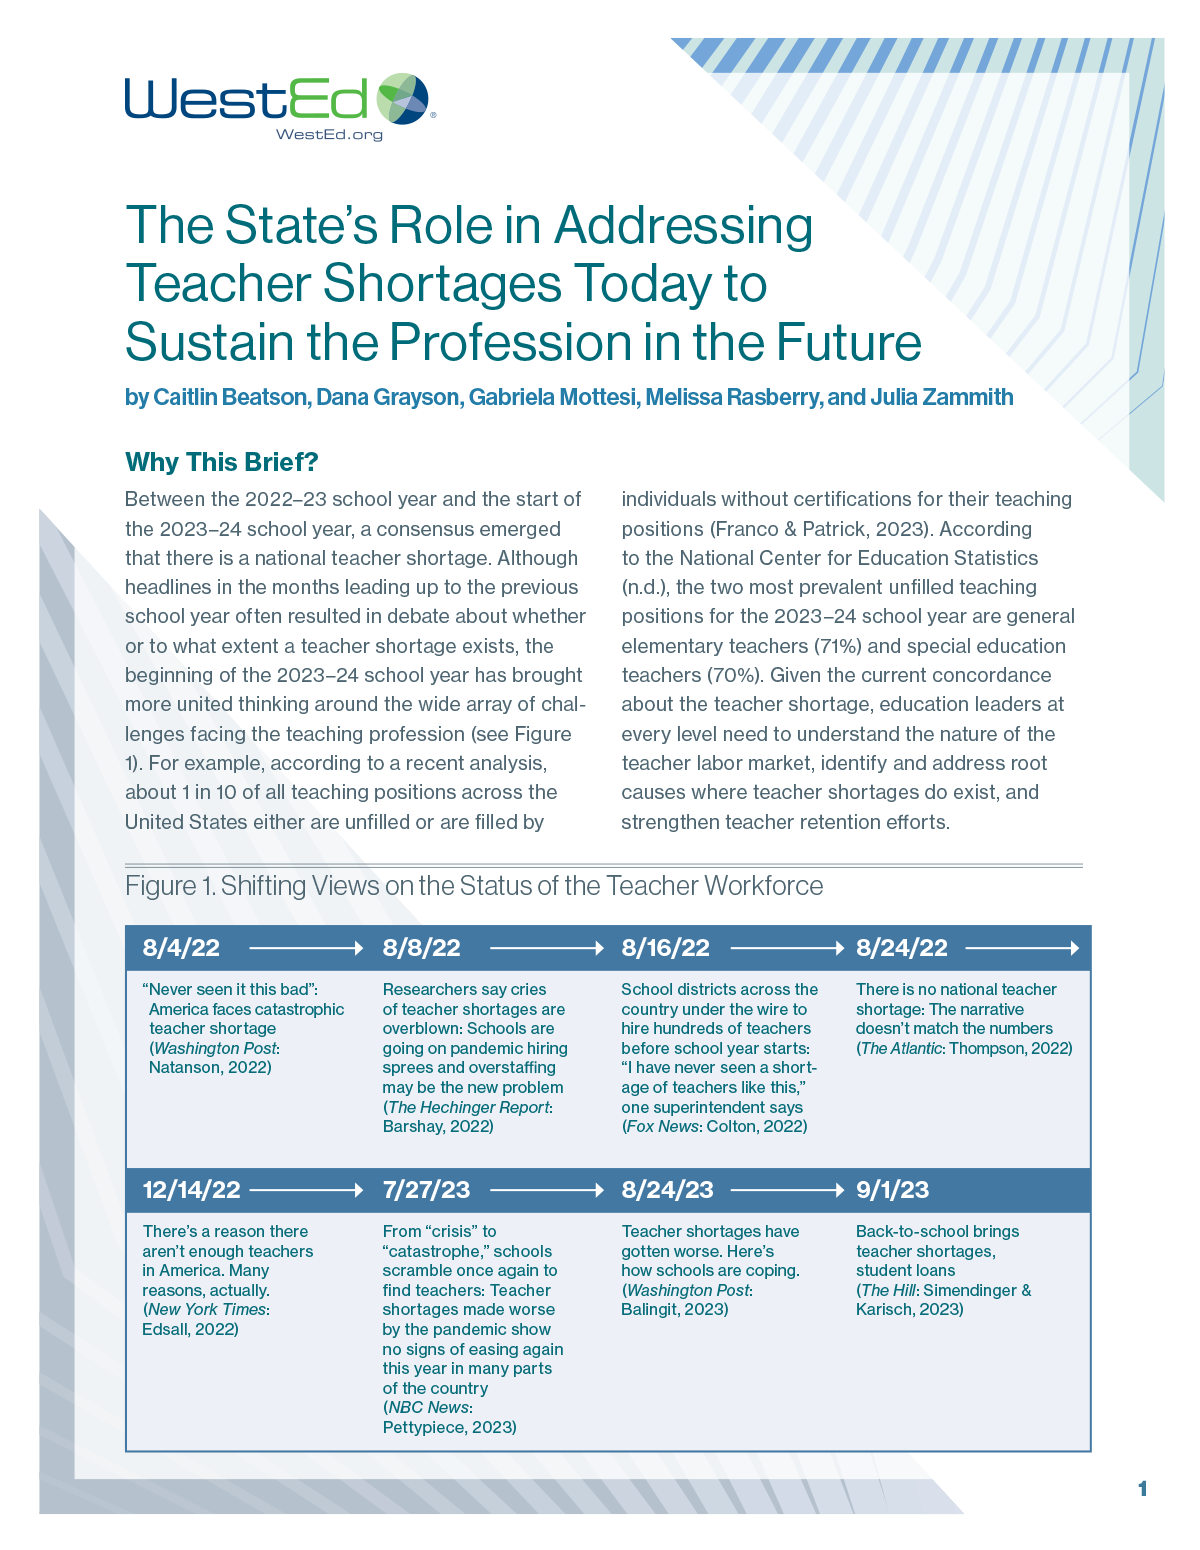 The State’s Role in Addressing Teacher Shortages Today to Sustain the Profession in the Future